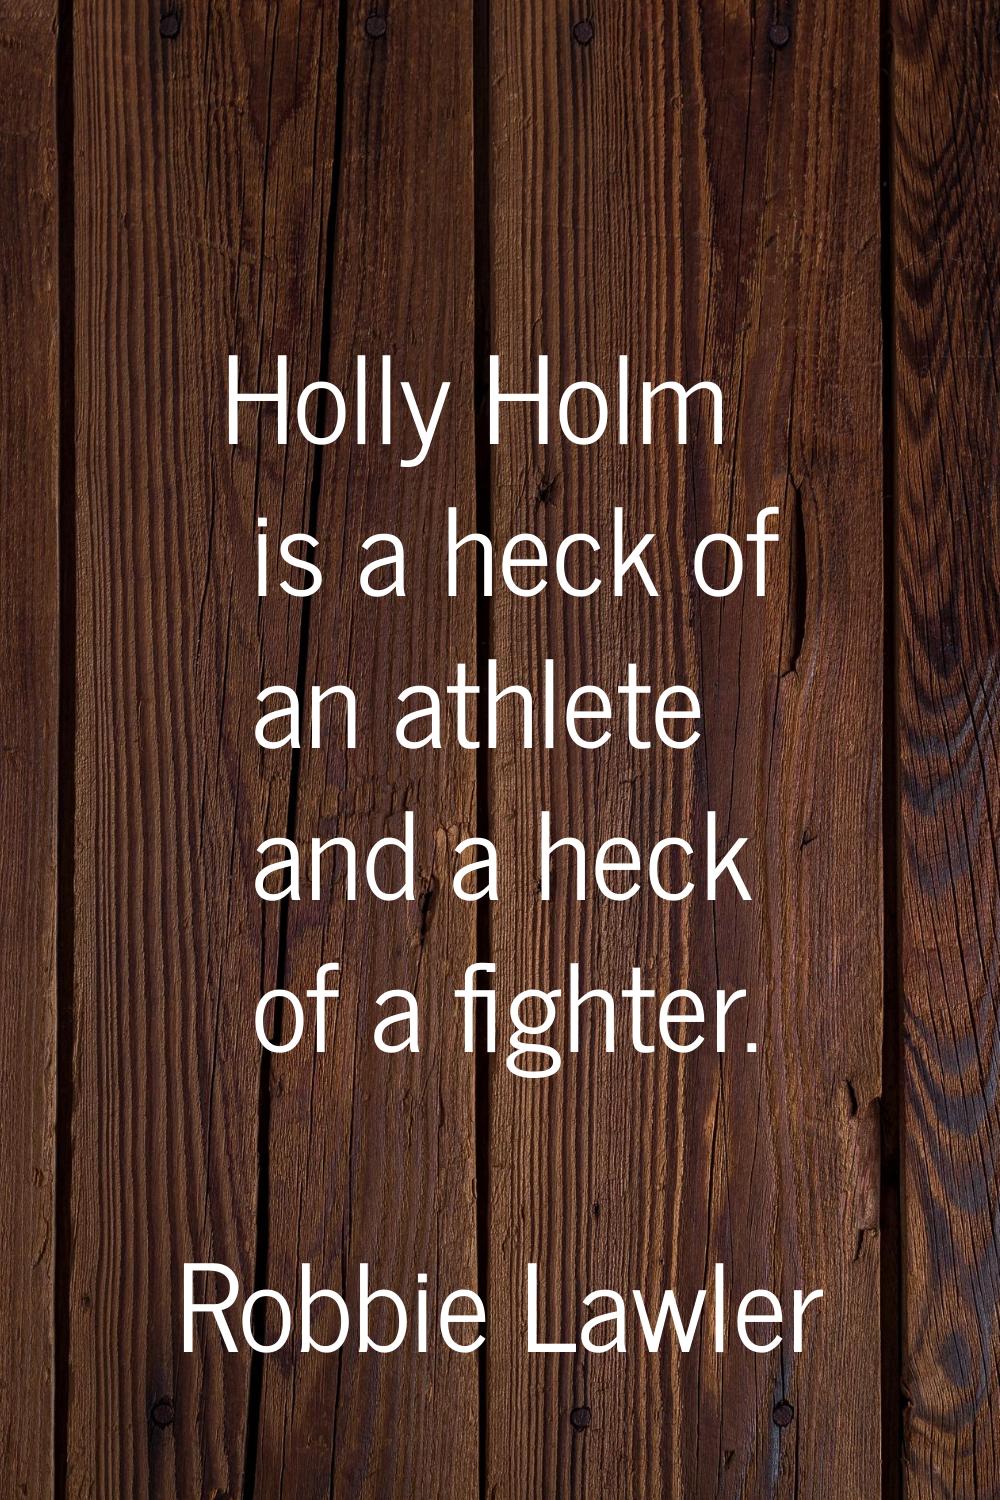 Holly Holm is a heck of an athlete and a heck of a fighter.